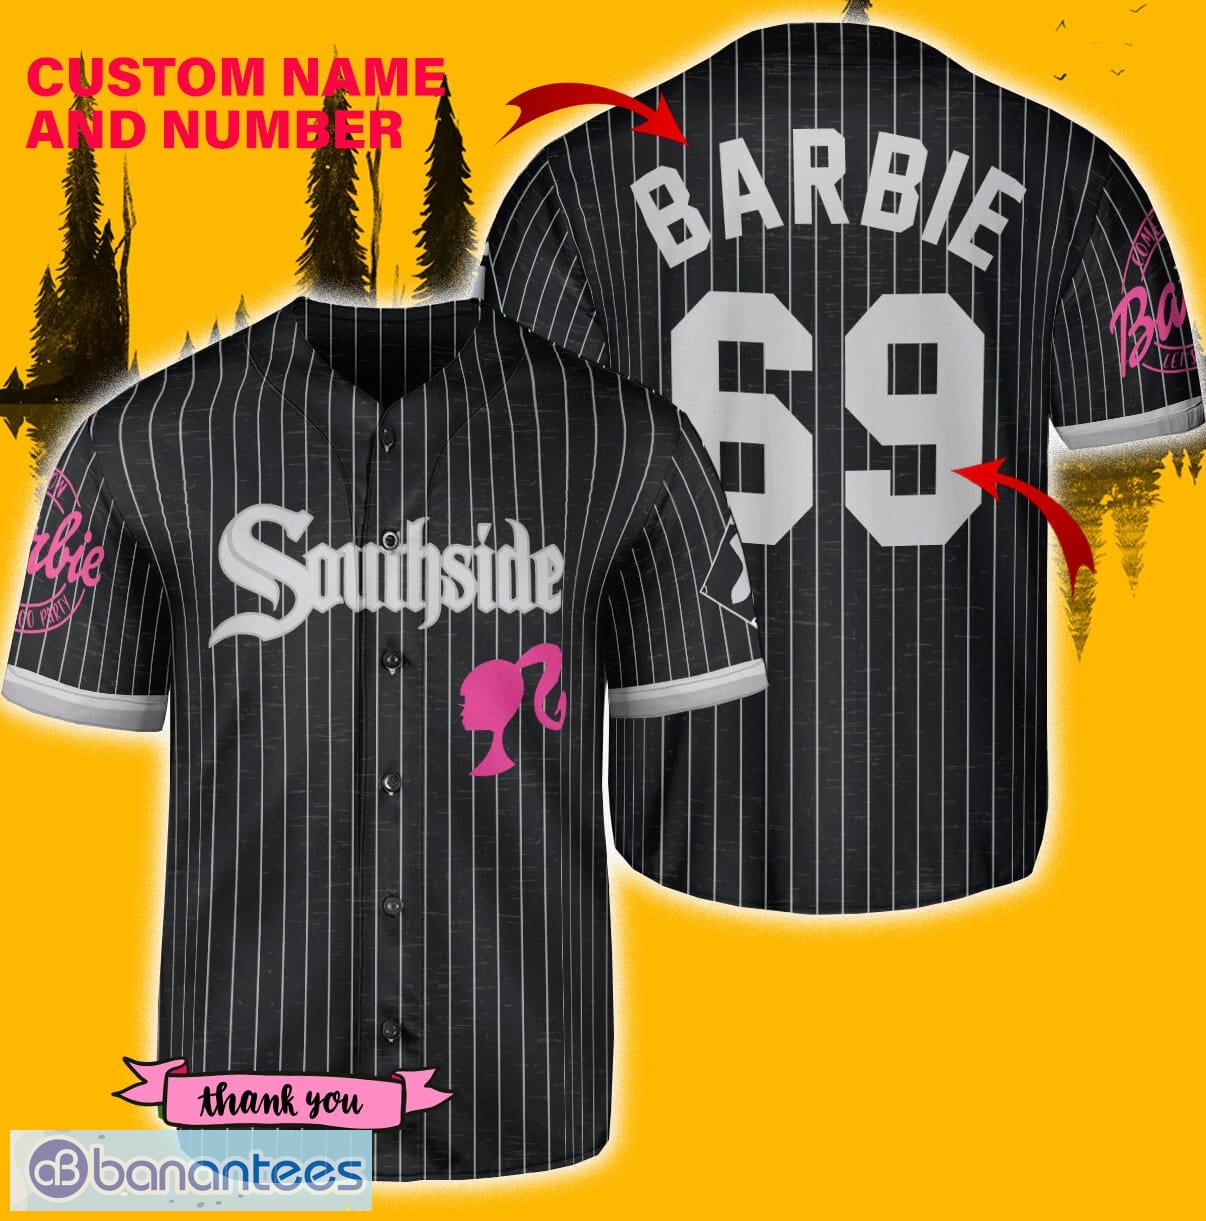 white sox pink jersey